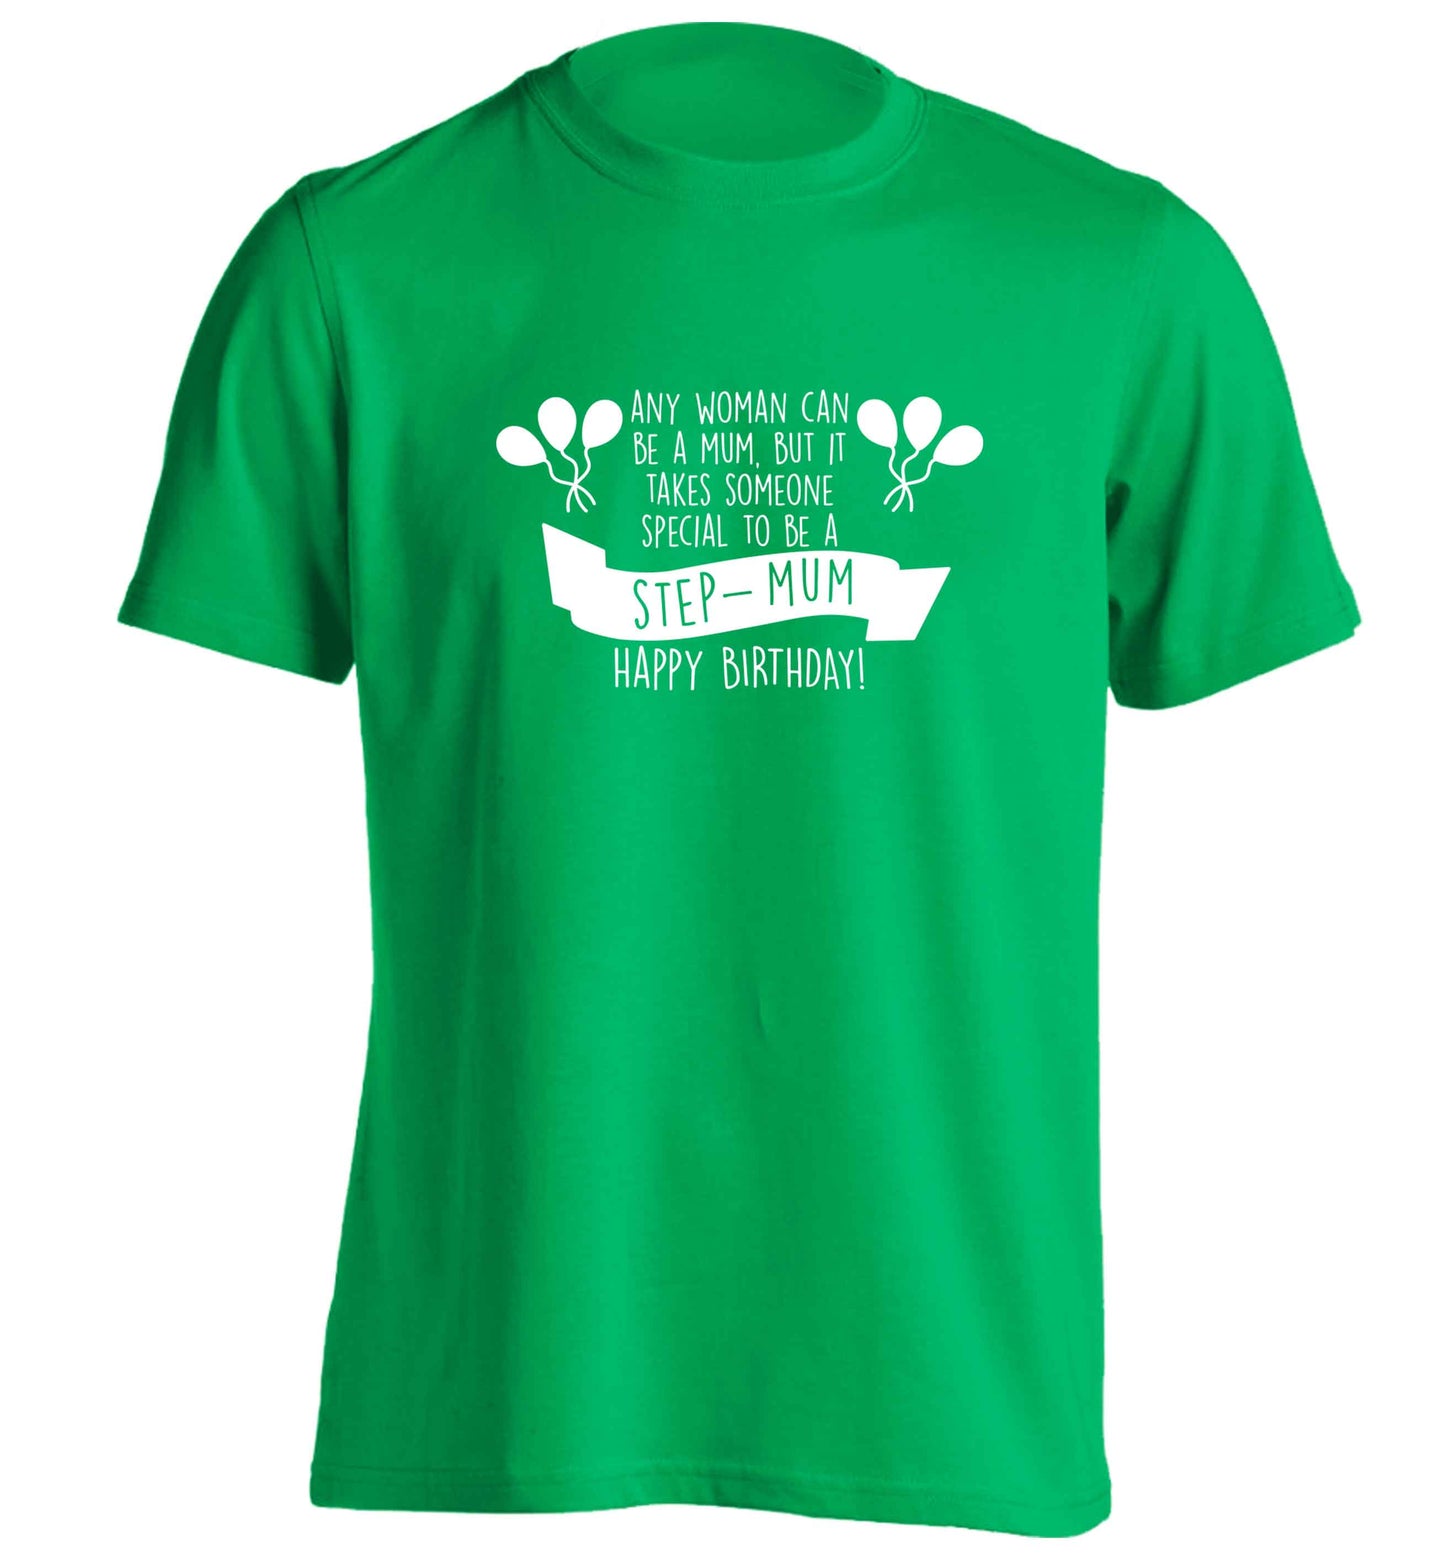 Takes someone special to be a step-mum, happy birthday! adults unisex green Tshirt 2XL